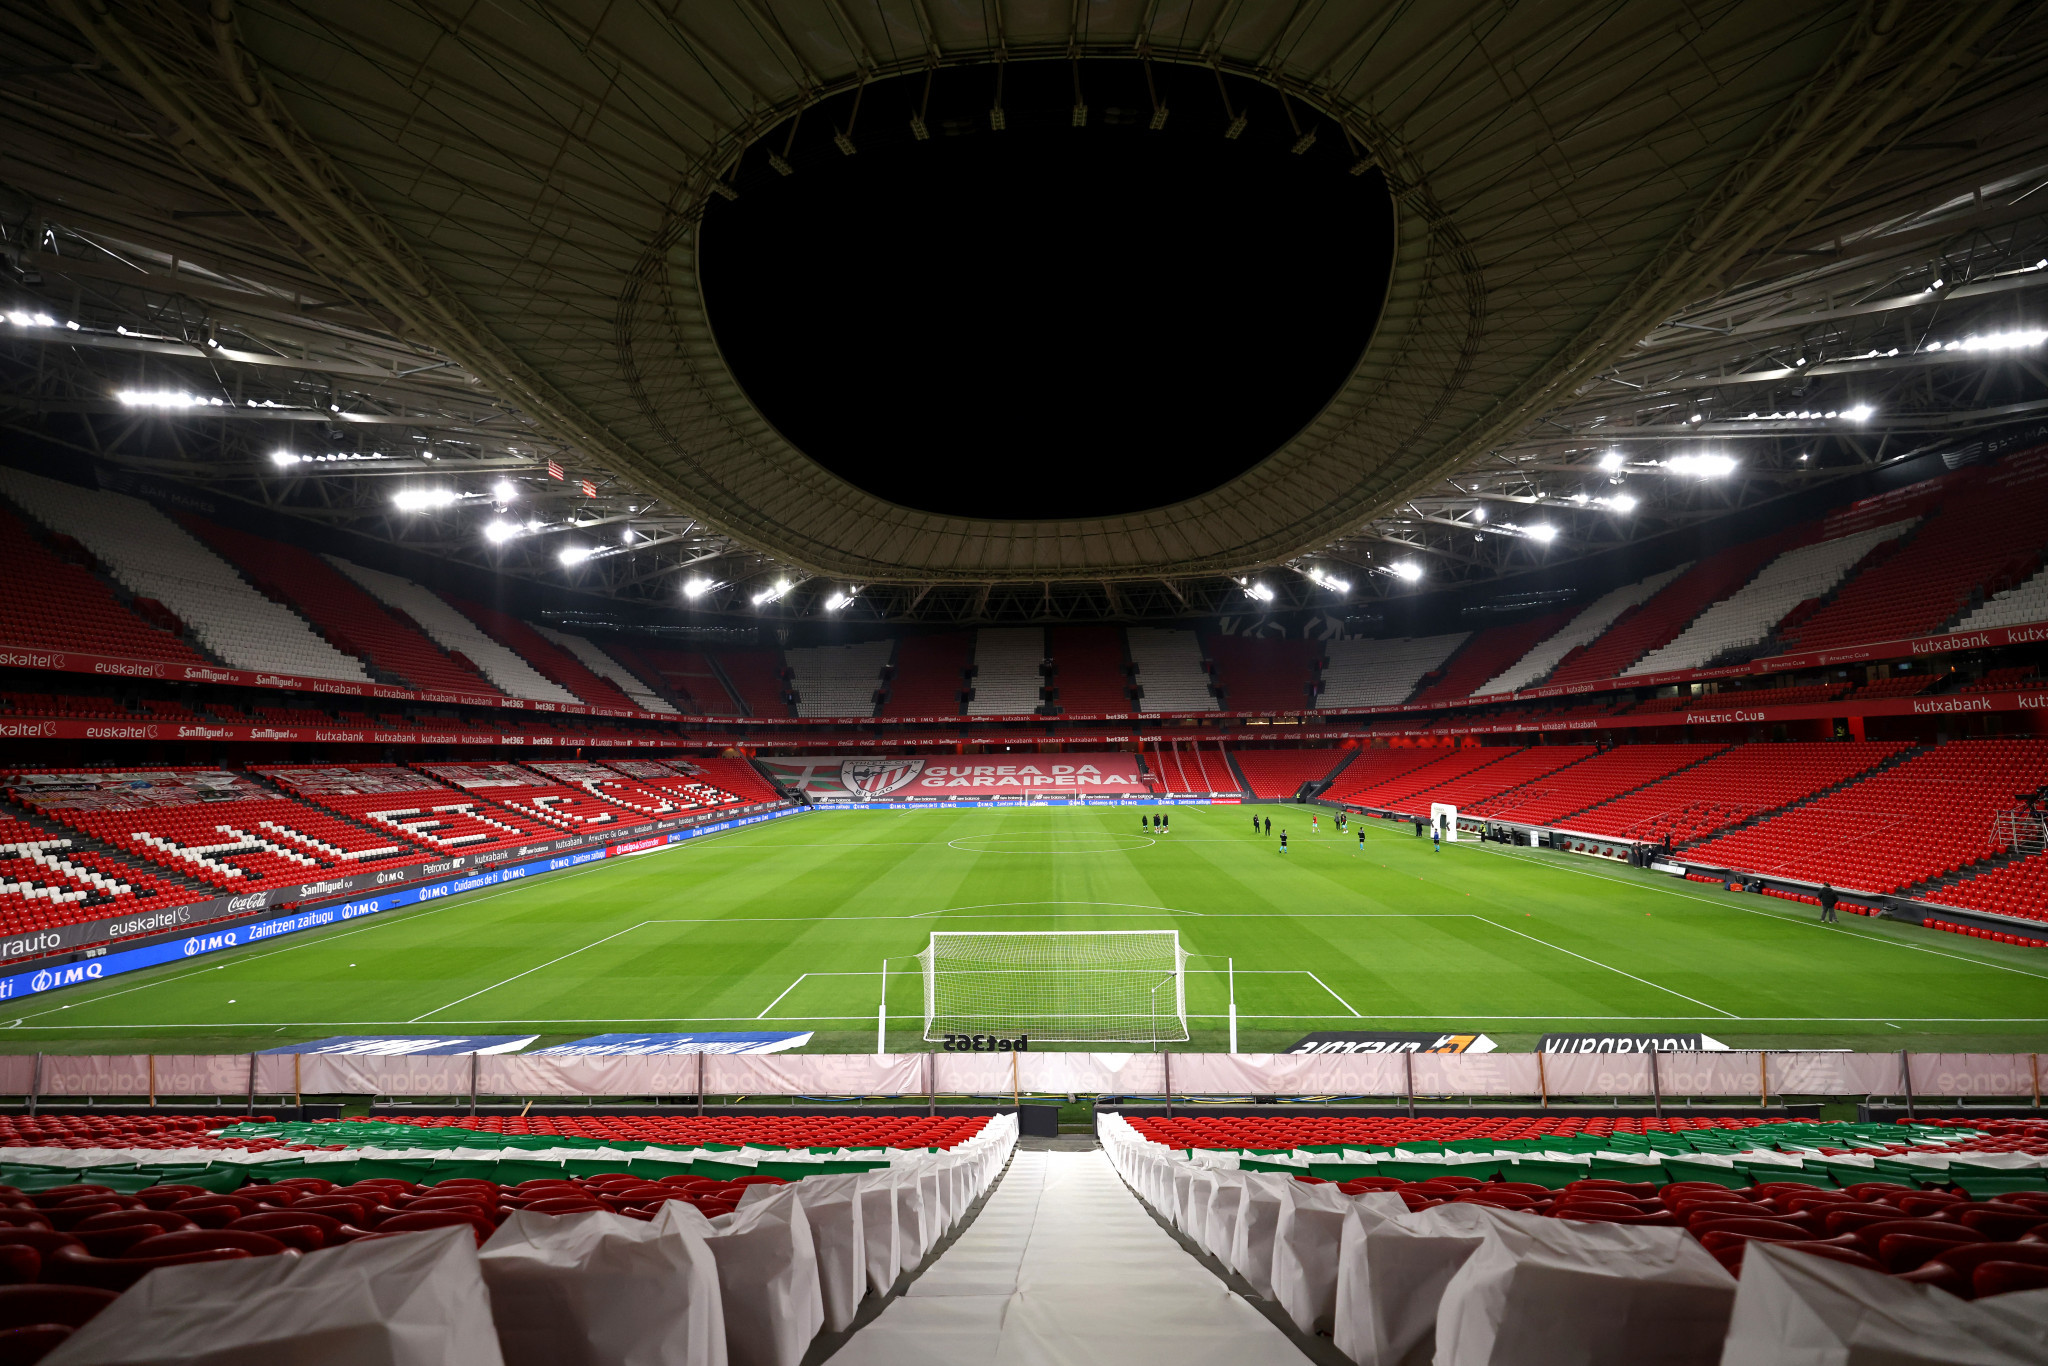 Bilbao's San Mamés may lose the right to stage matches at this year's Euro 2020 ©Getty Images